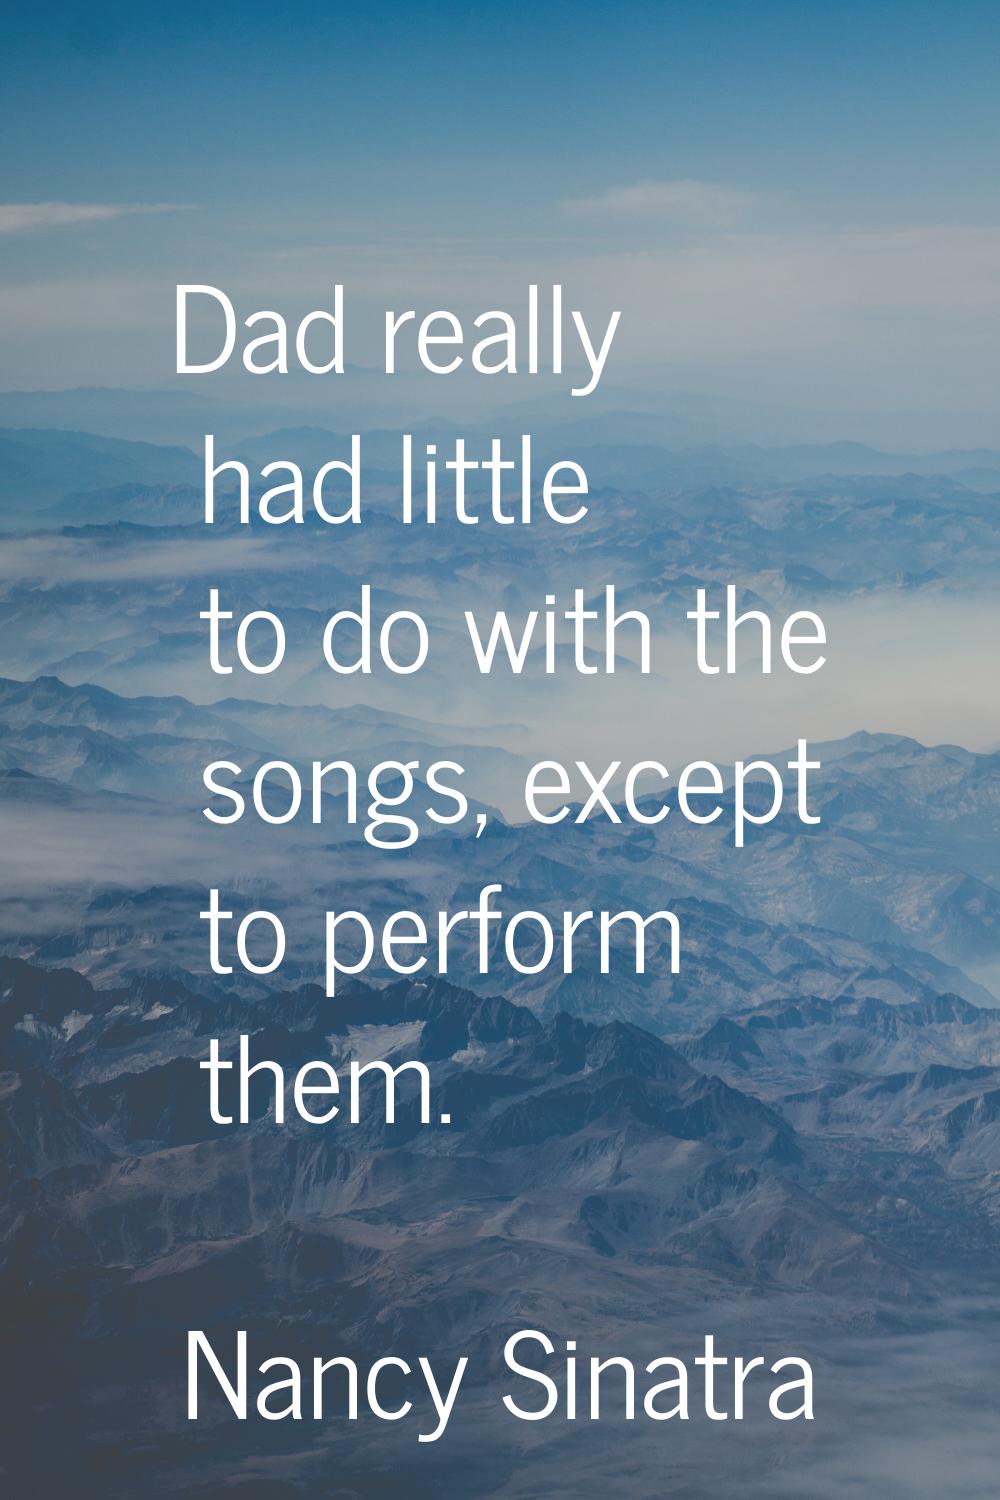 Dad really had little to do with the songs, except to perform them.